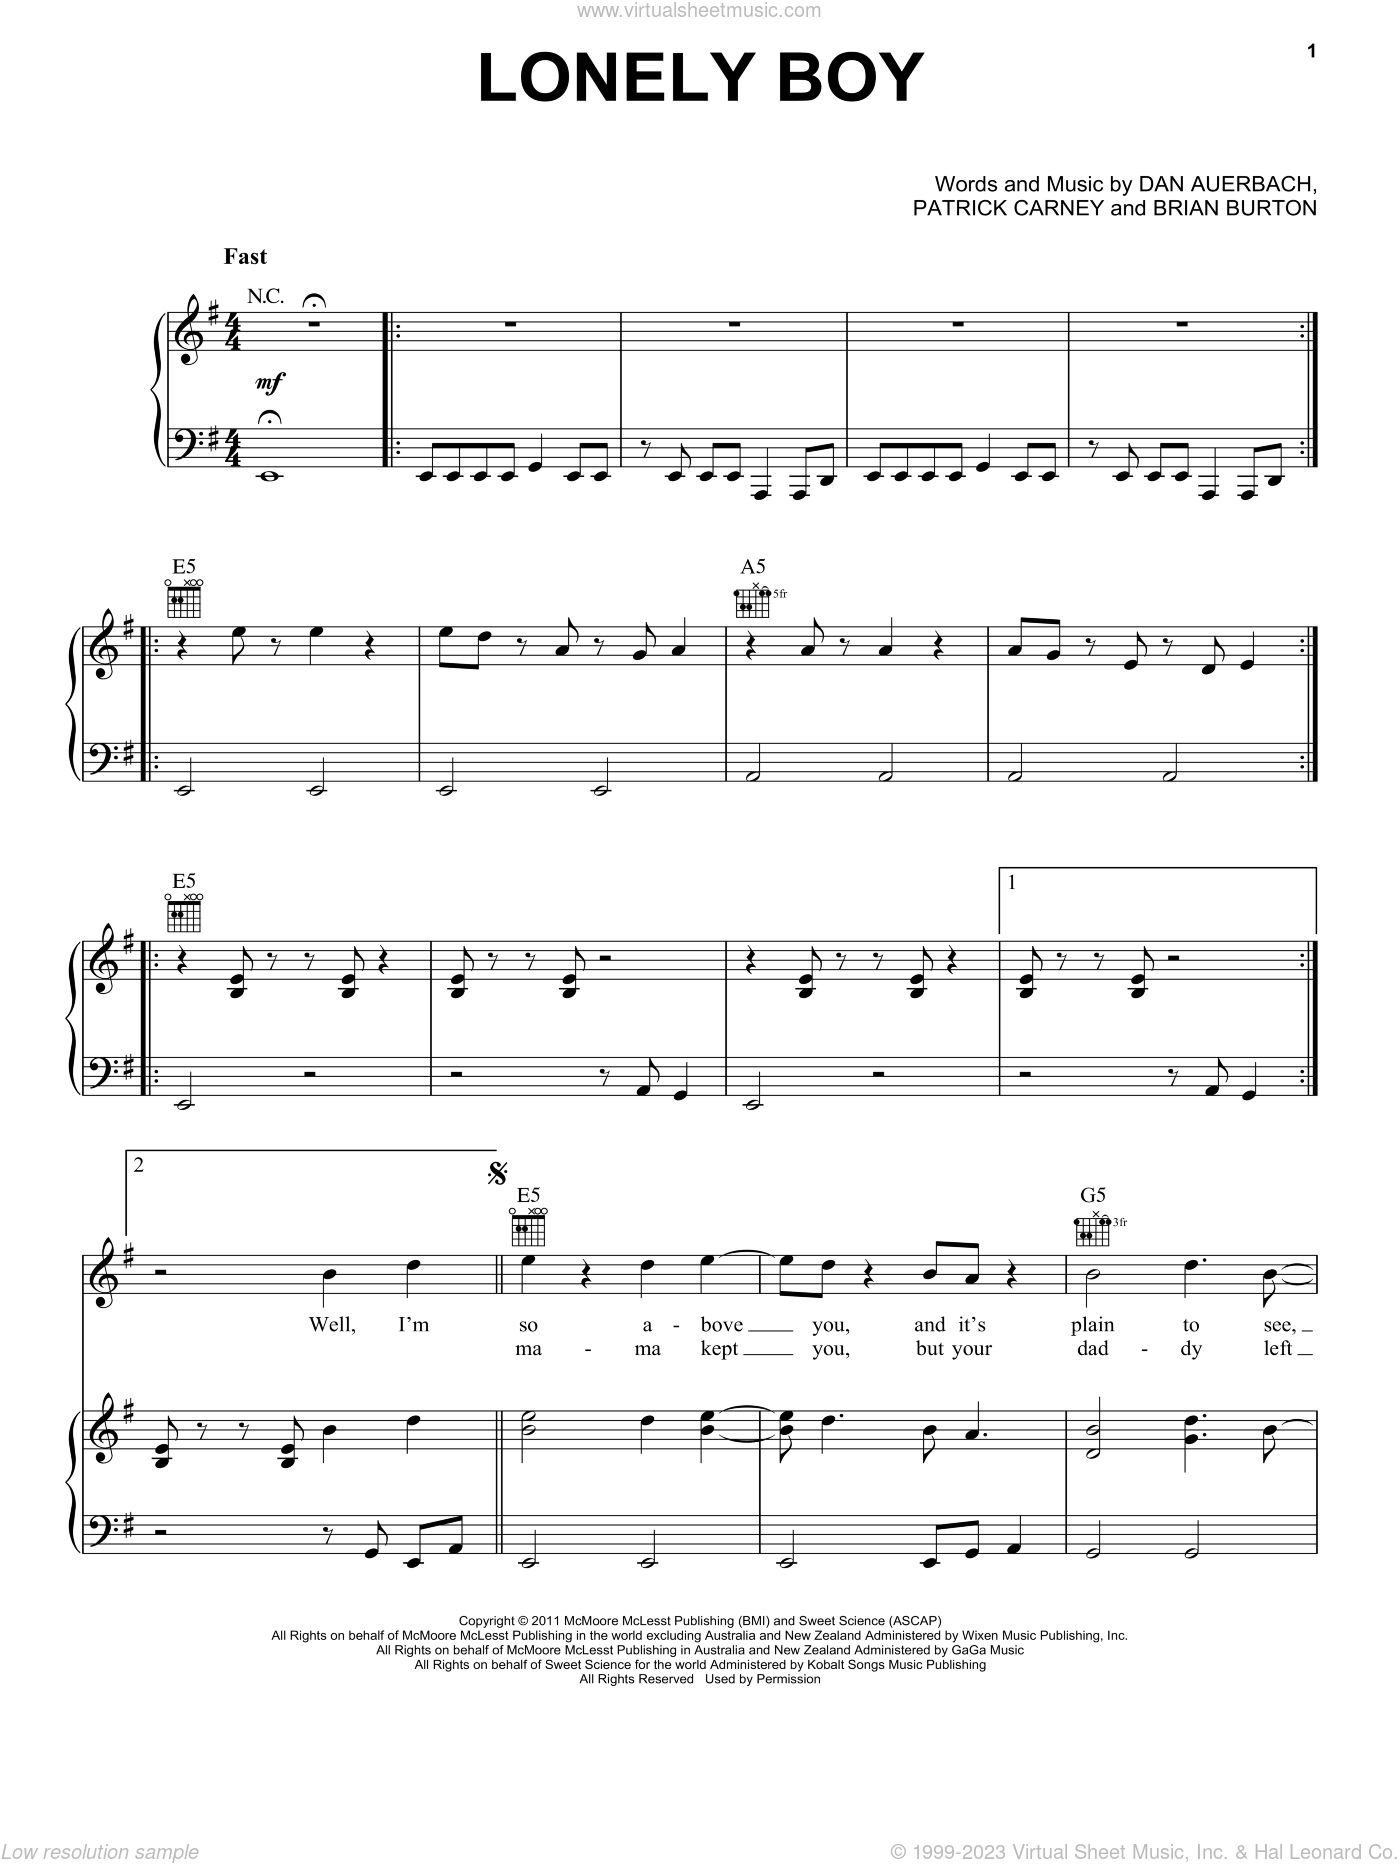 The Black Keys: Lonely Boy sheet music for voice, piano or guitar